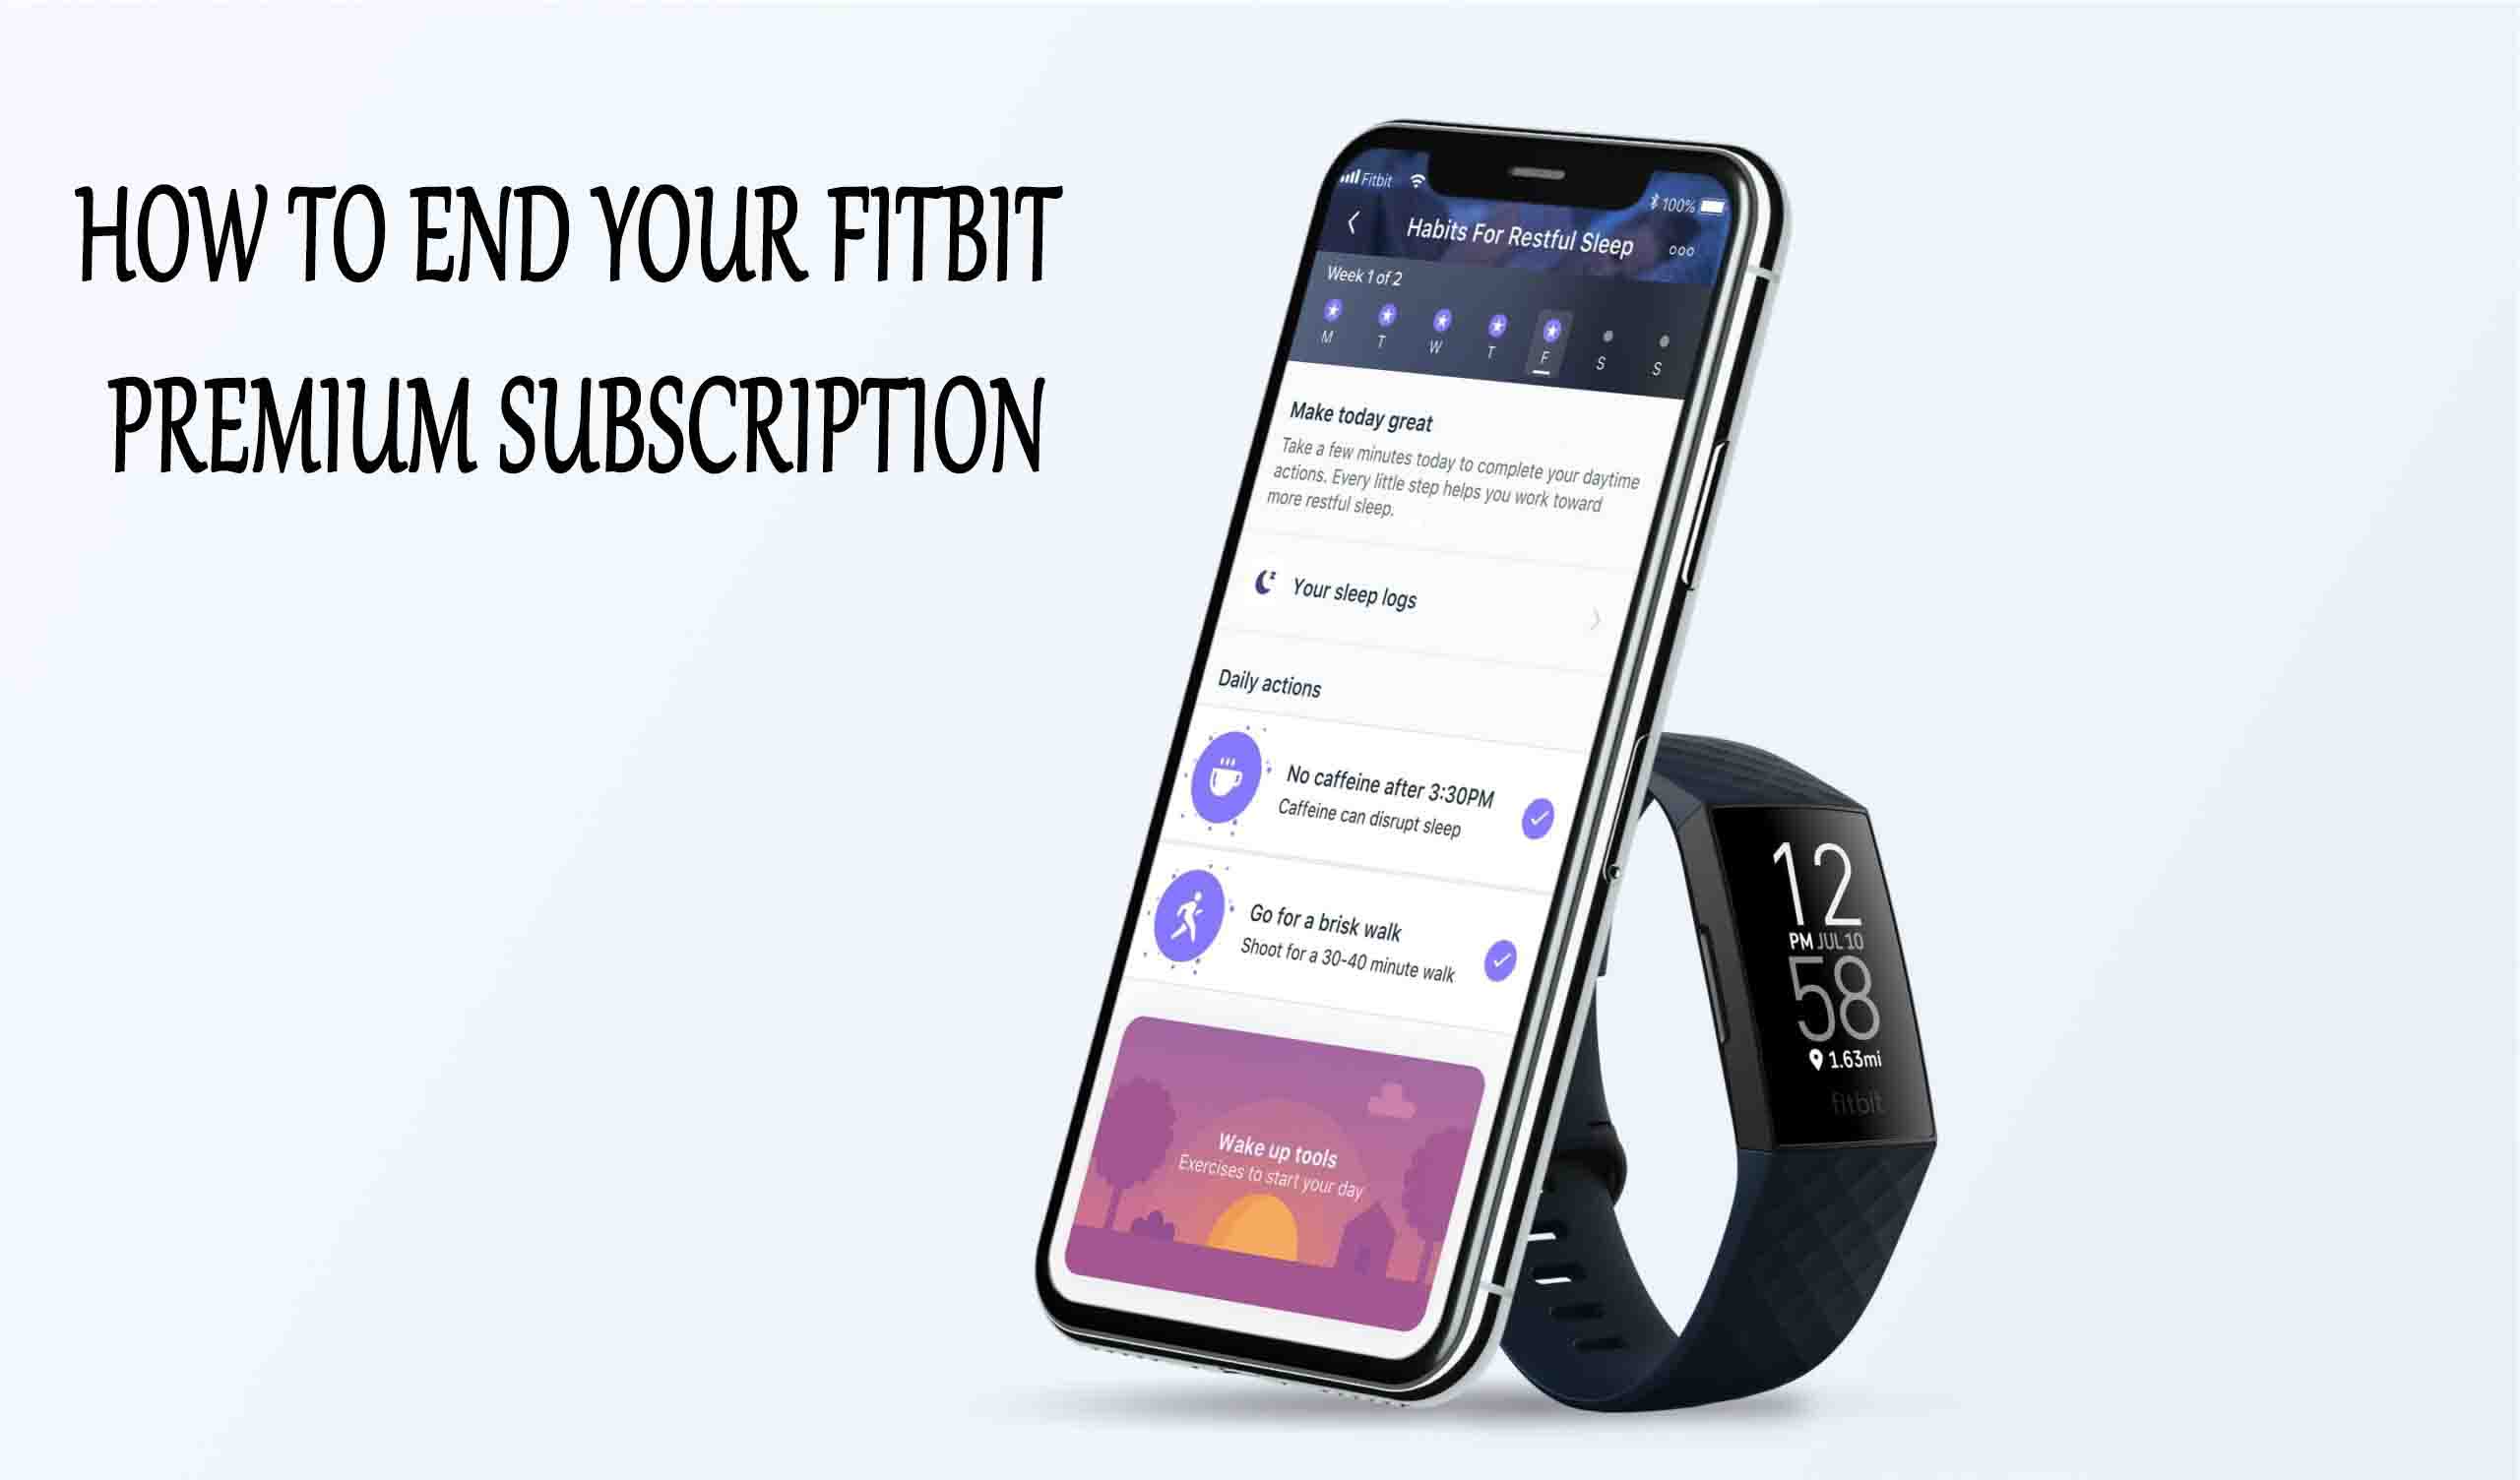 How To End Your Fitbit Premium Subscription